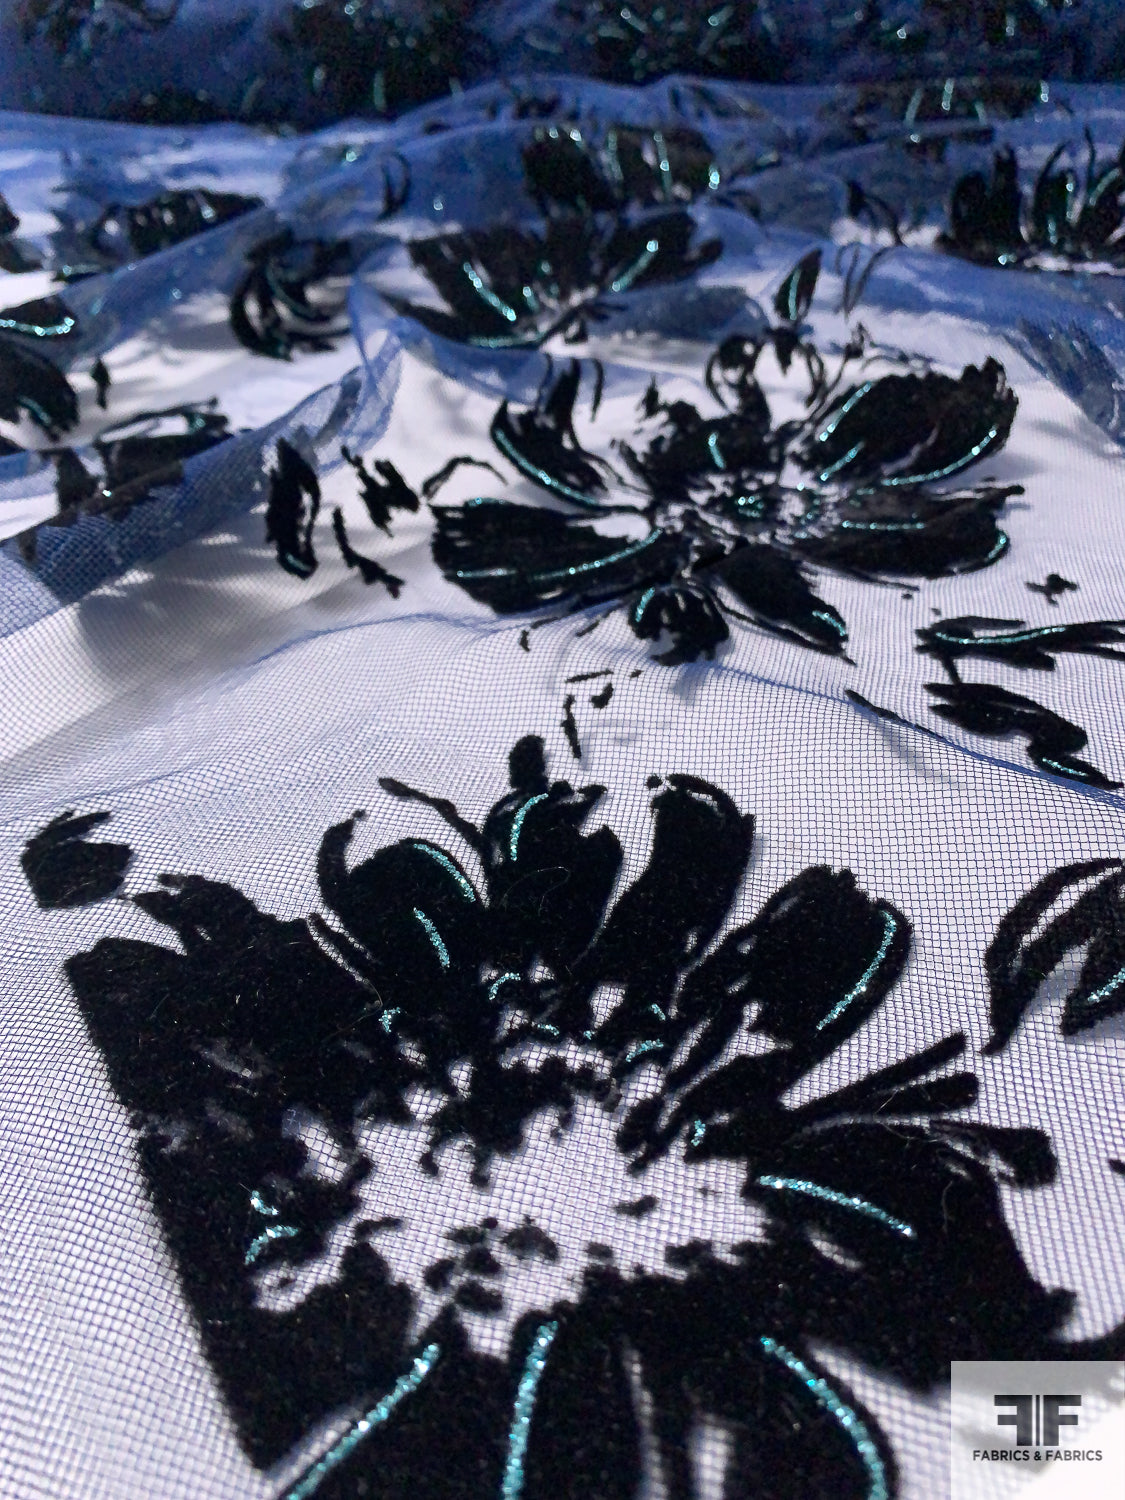 French Floral Flocked Diamond Tulle with Cracked Ice Detailing - Navy / Black / Metallic Aqua